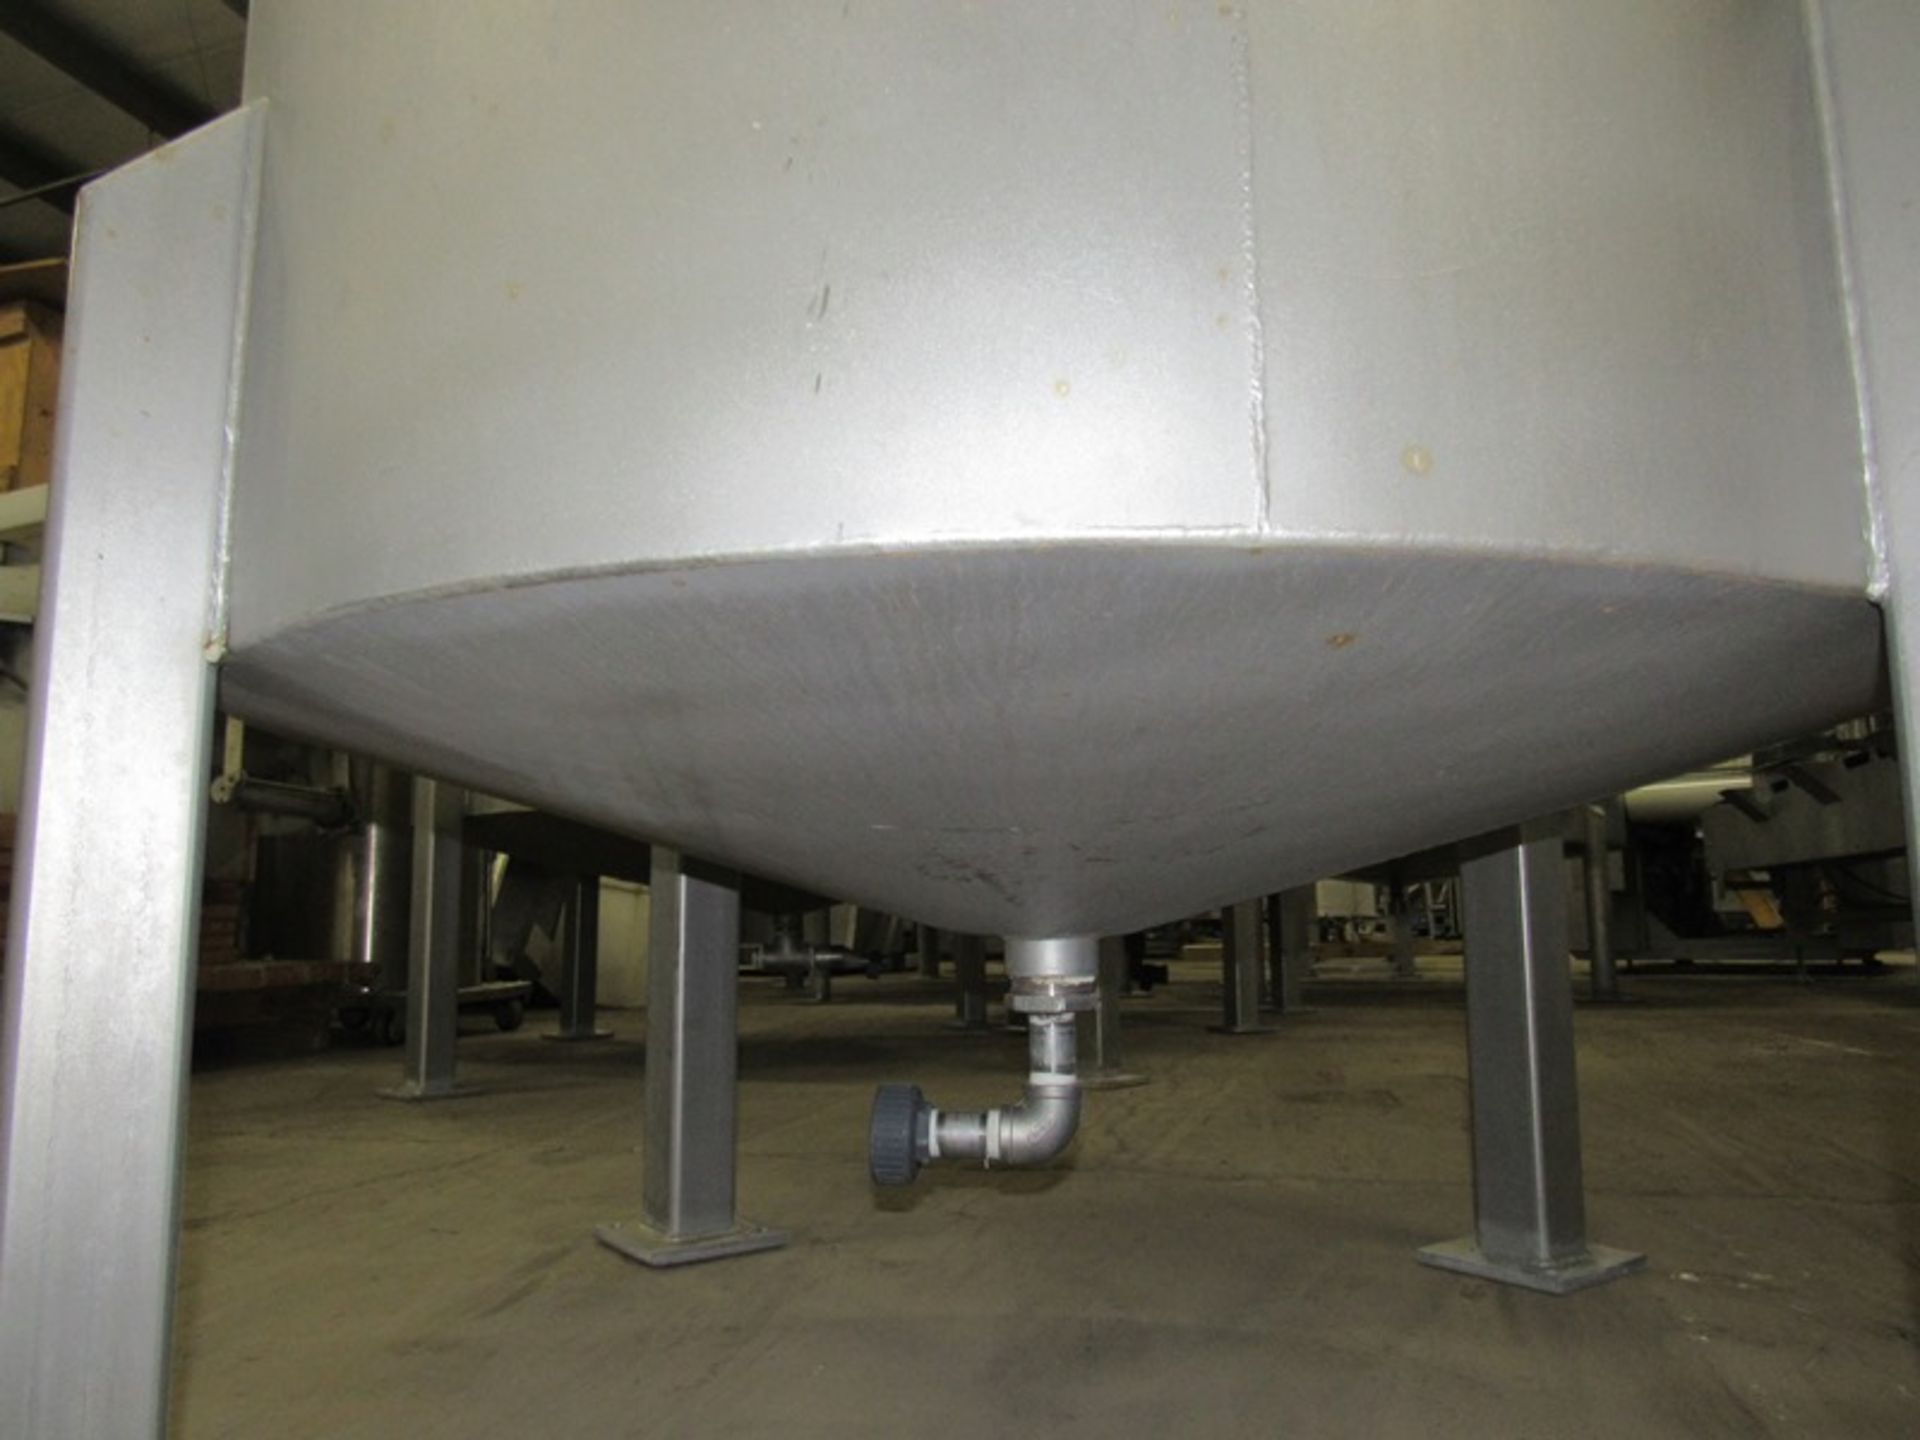 Afeco Stainless Steel Single Tank with solid lid, 44" dia. X 60" deep cone bottom, 80" tall overall, - Image 2 of 4